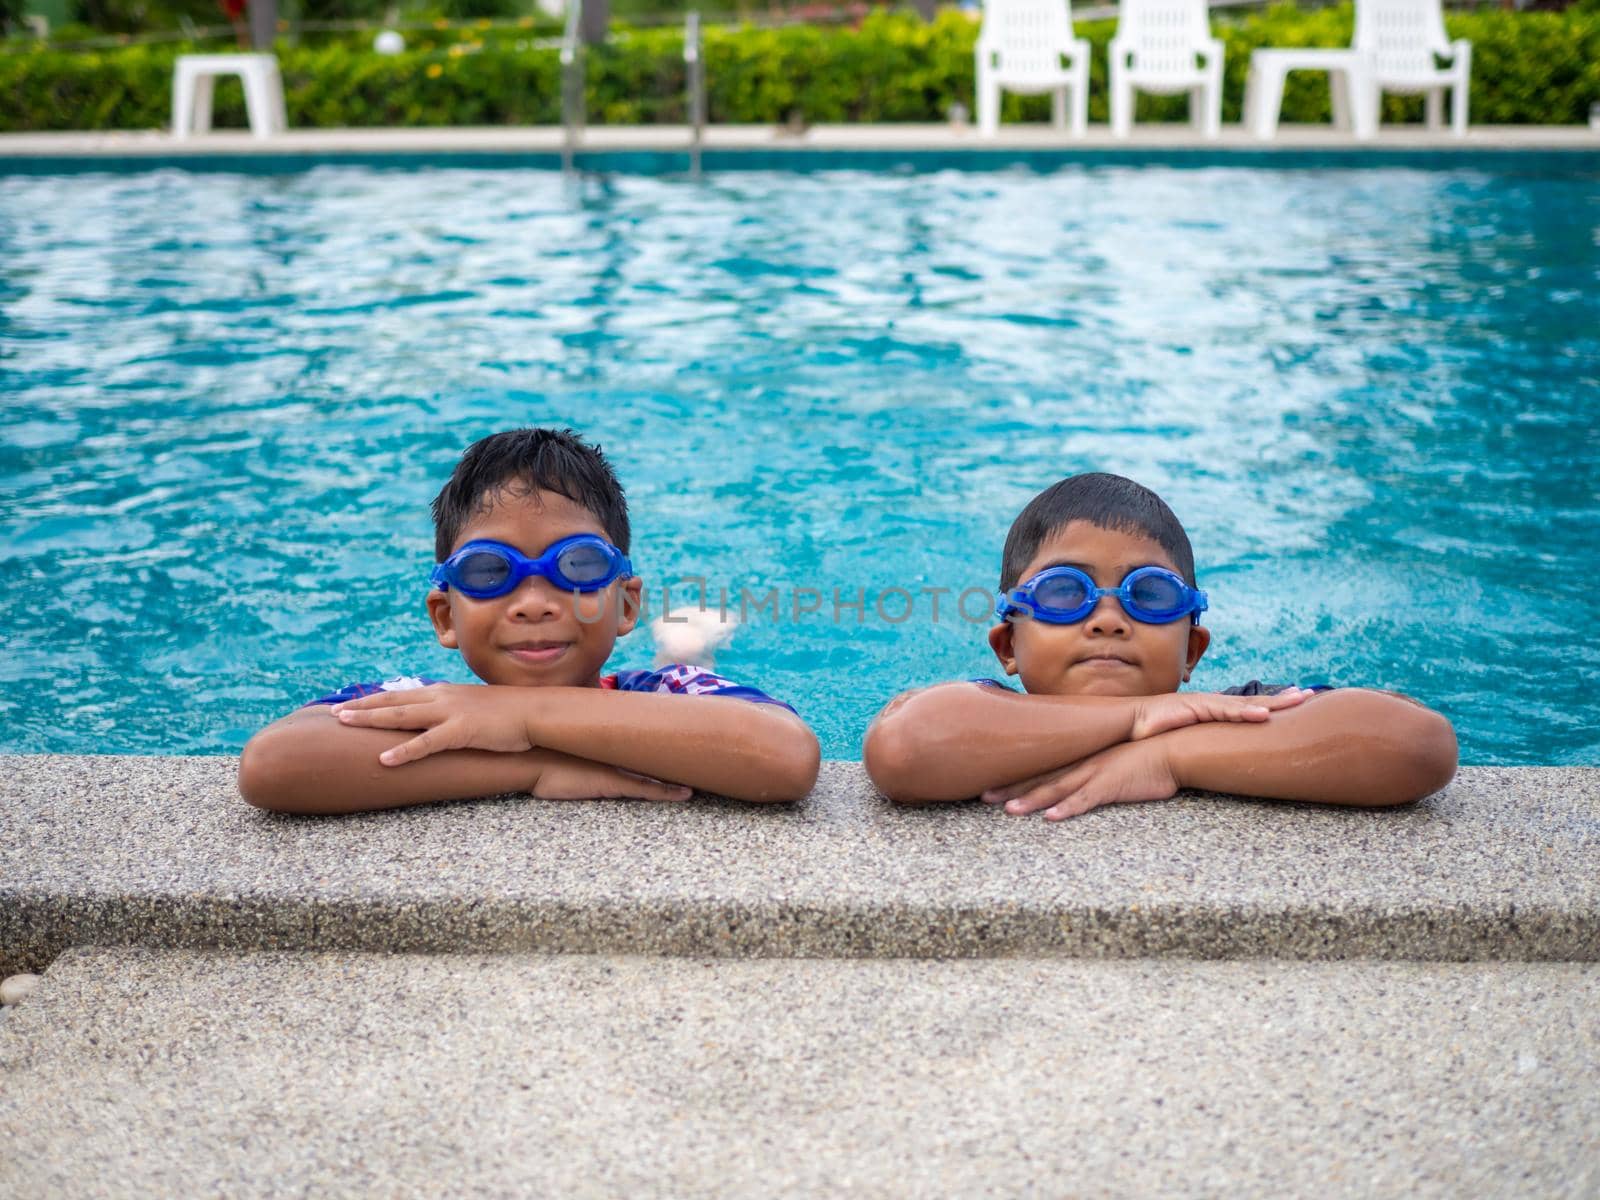 brothers wearing swimsuits and glasses Smile while perched on the edge of the pool. by Unimages2527